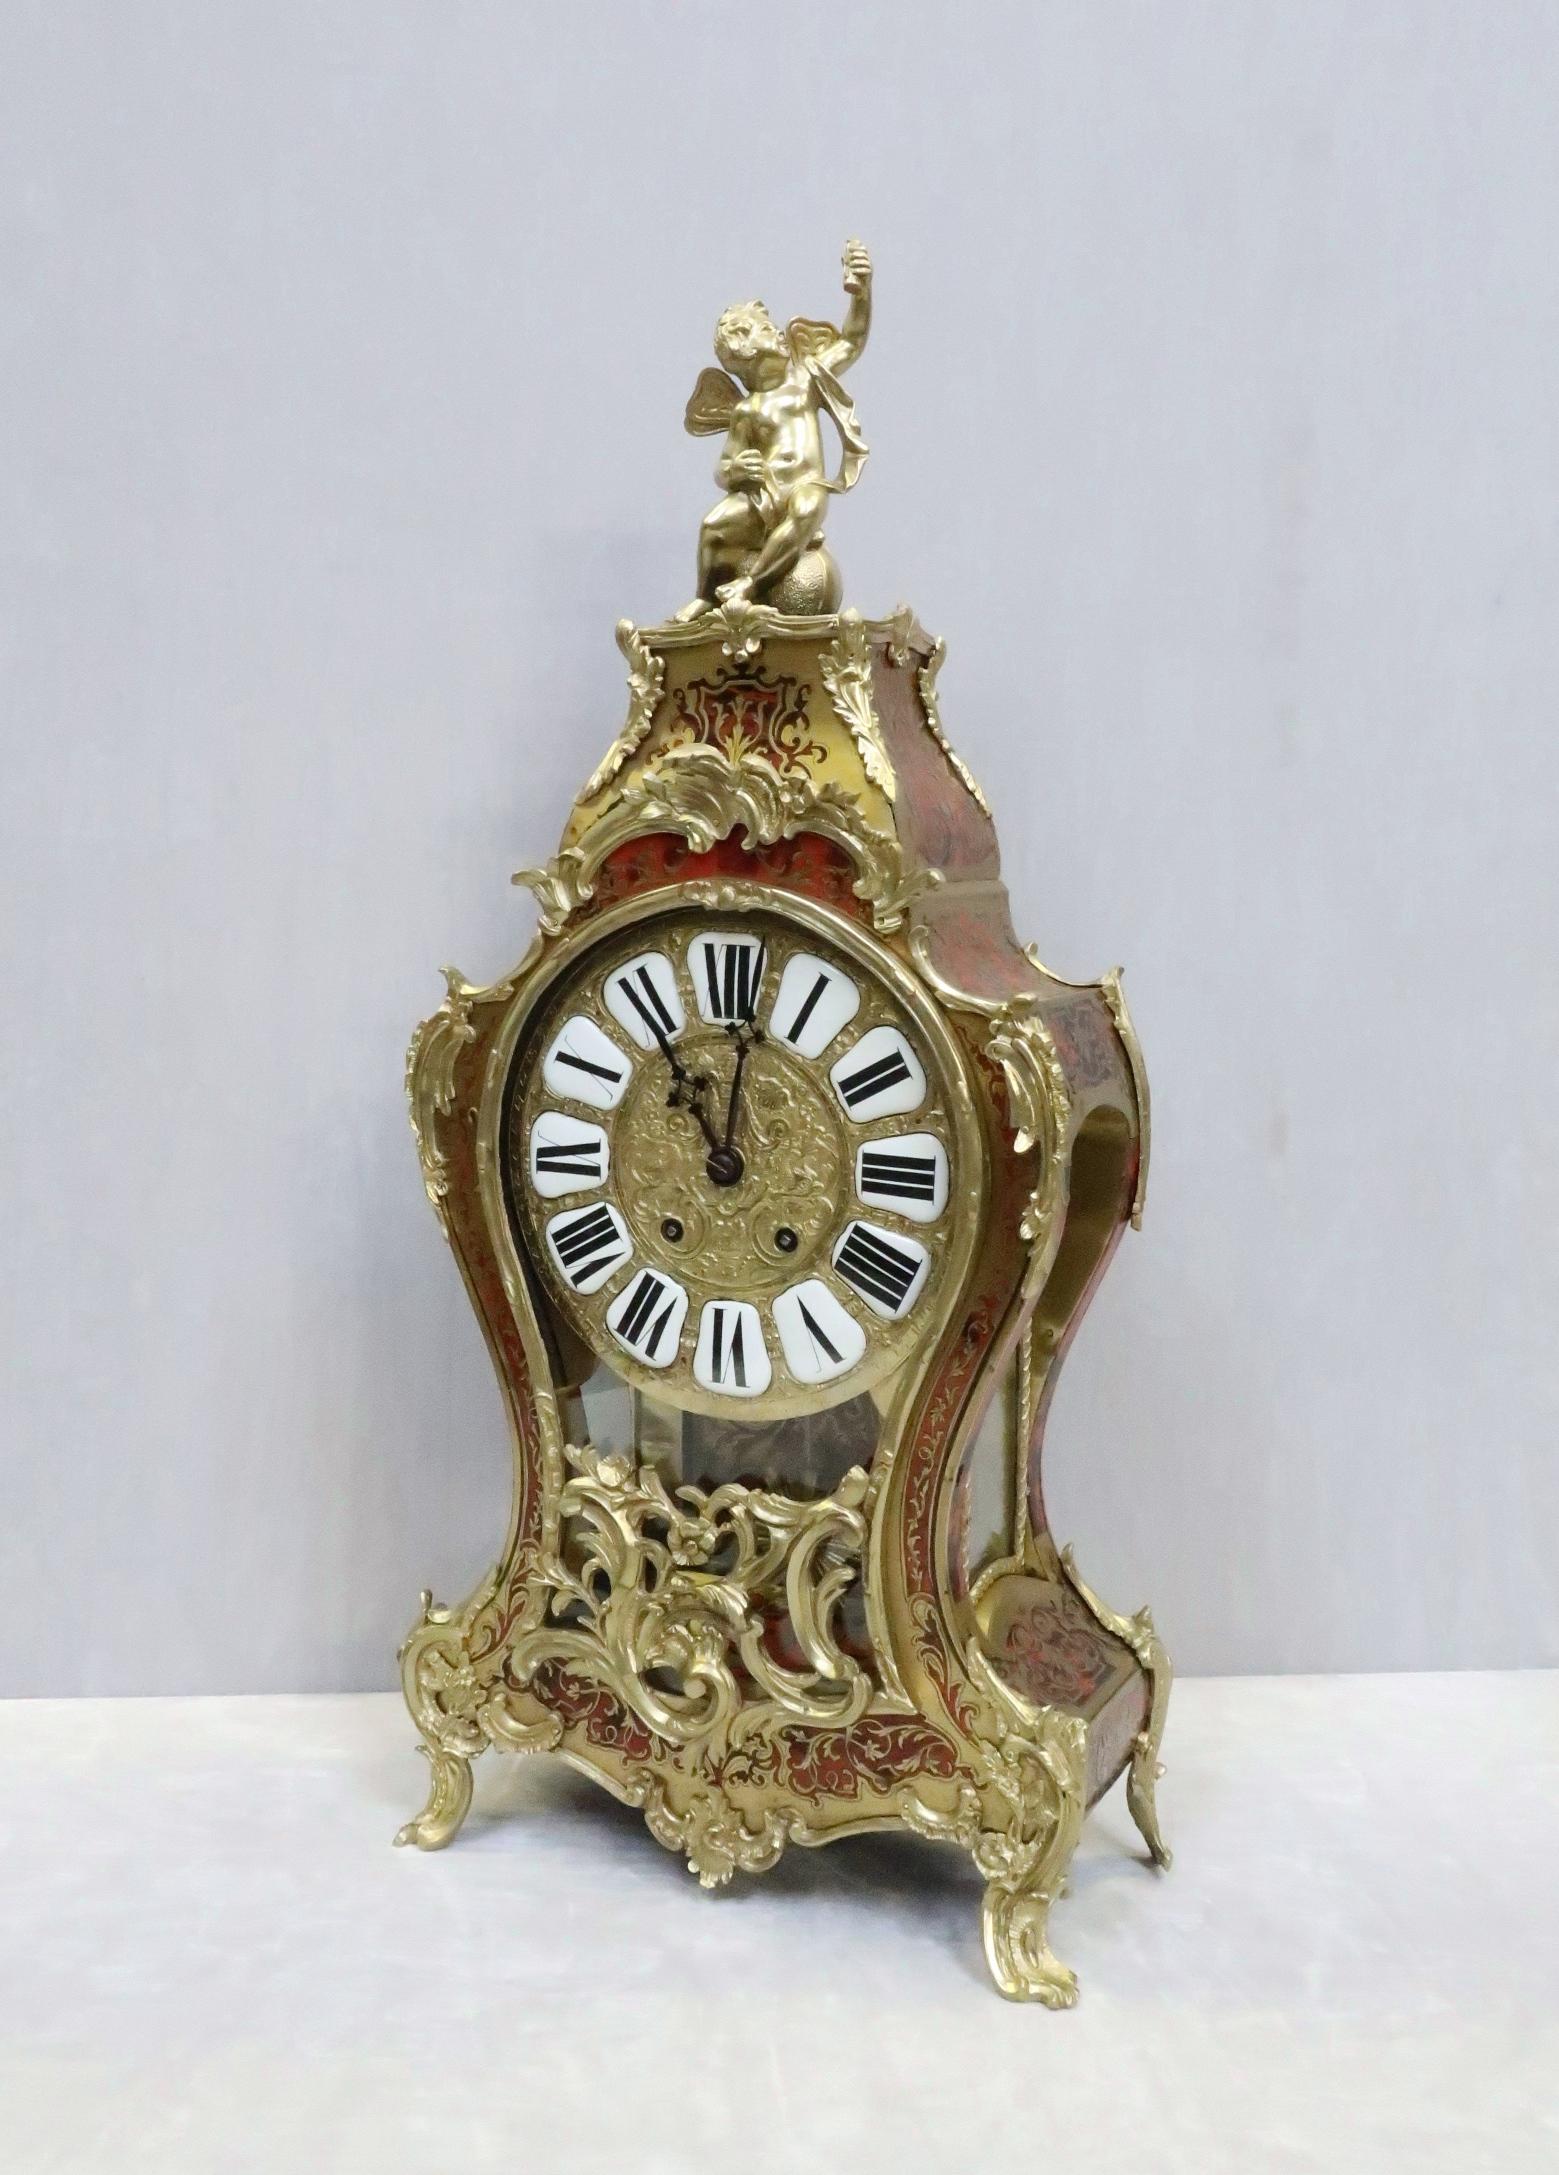 An extremely impressive and fine quality French Louis XV style boulle red tortoise shell and engraved brass inlaid bracket clock. The clock has very good quality bronze gilt ormolu mounts with cherub finial to the top, front and side glass viewing